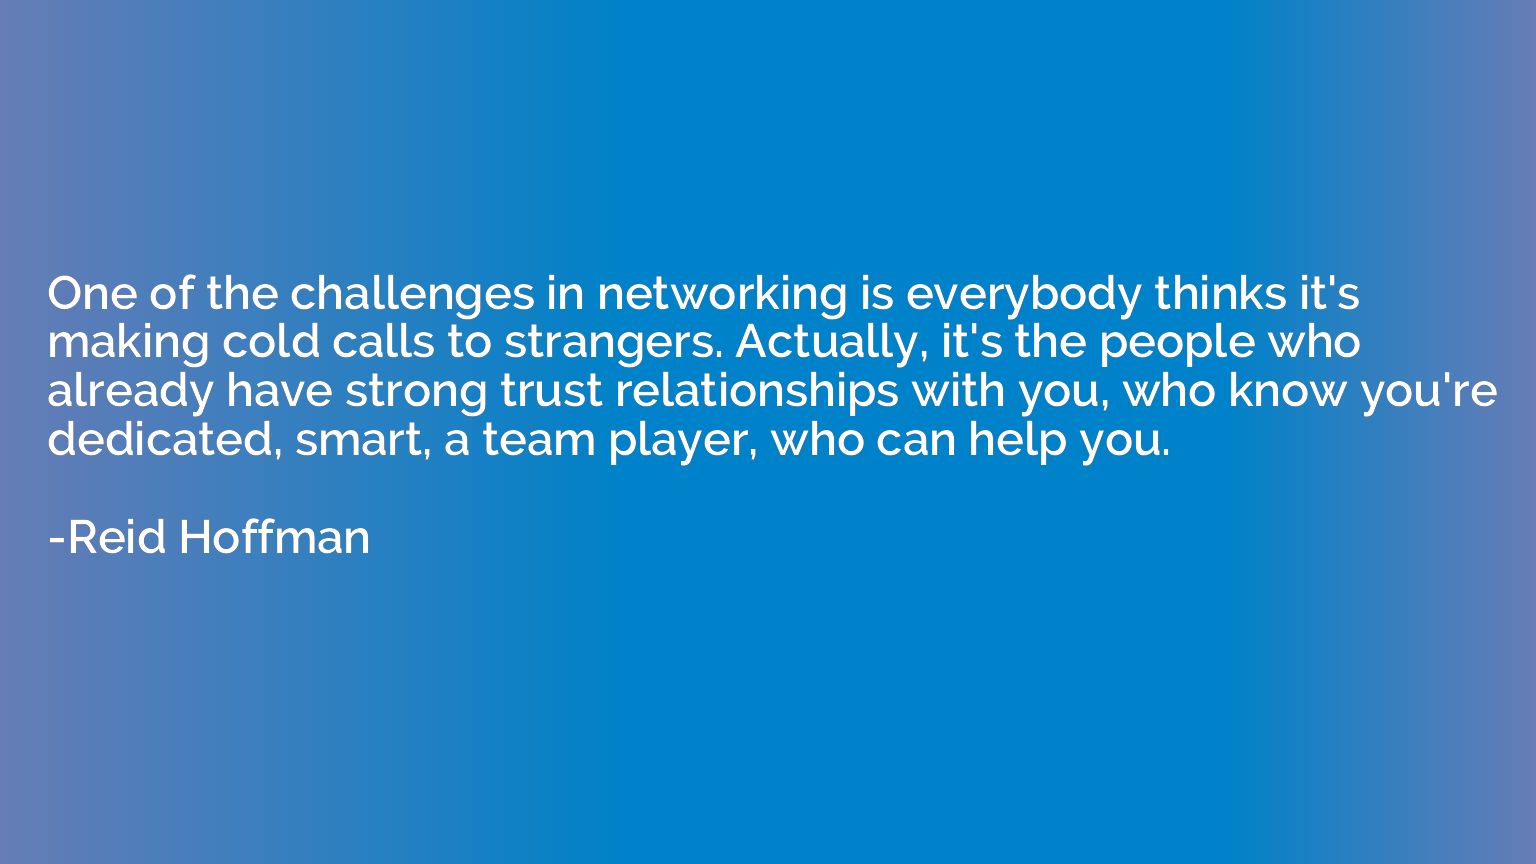 One of the challenges in networking is everybody thinks it's